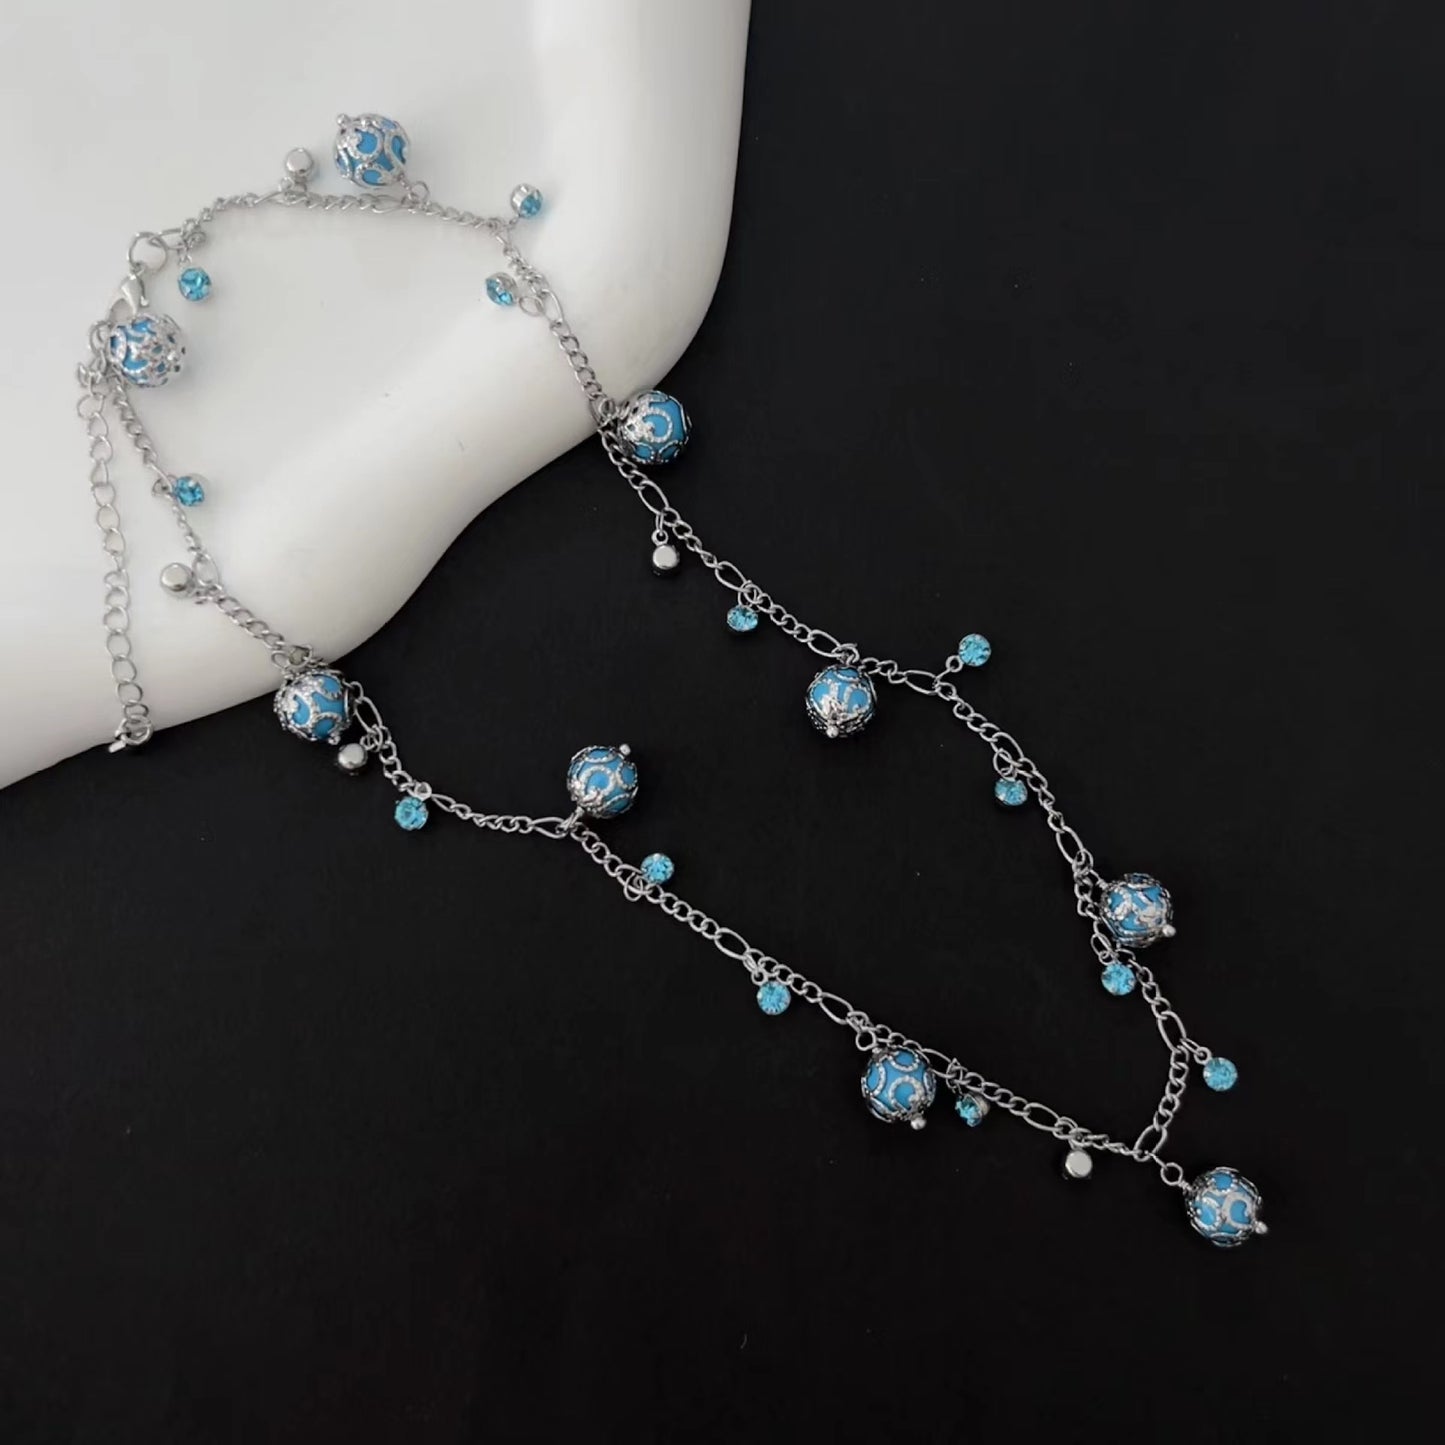 Blue Butterfly Tassel Necklace, Sweet and Cool, Spicy Girl, Pure Desire Wind, Collar Chain, Light Luxury, Small and Popular, High Grade Feeling Neckchain